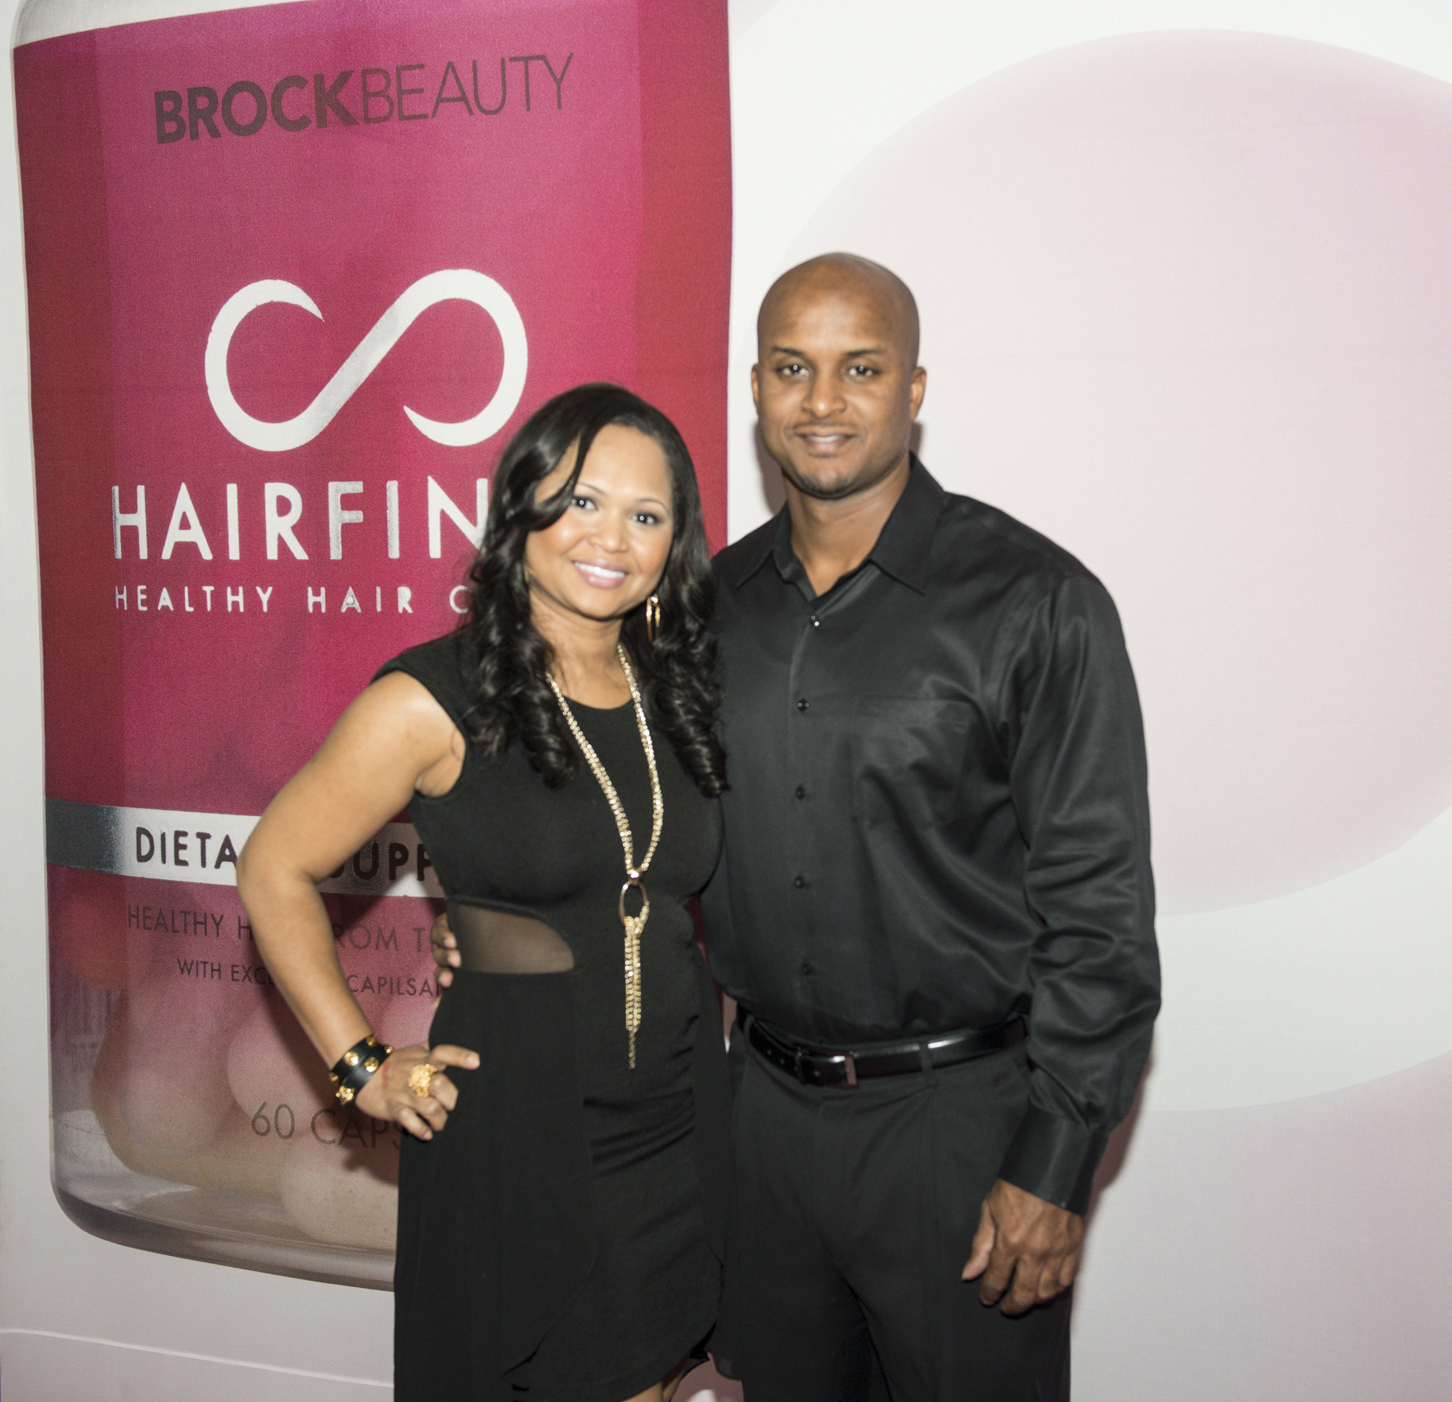 Brock Beauty owners Brock and Tymeka Lawrence at the LYHD EXPO in NYC